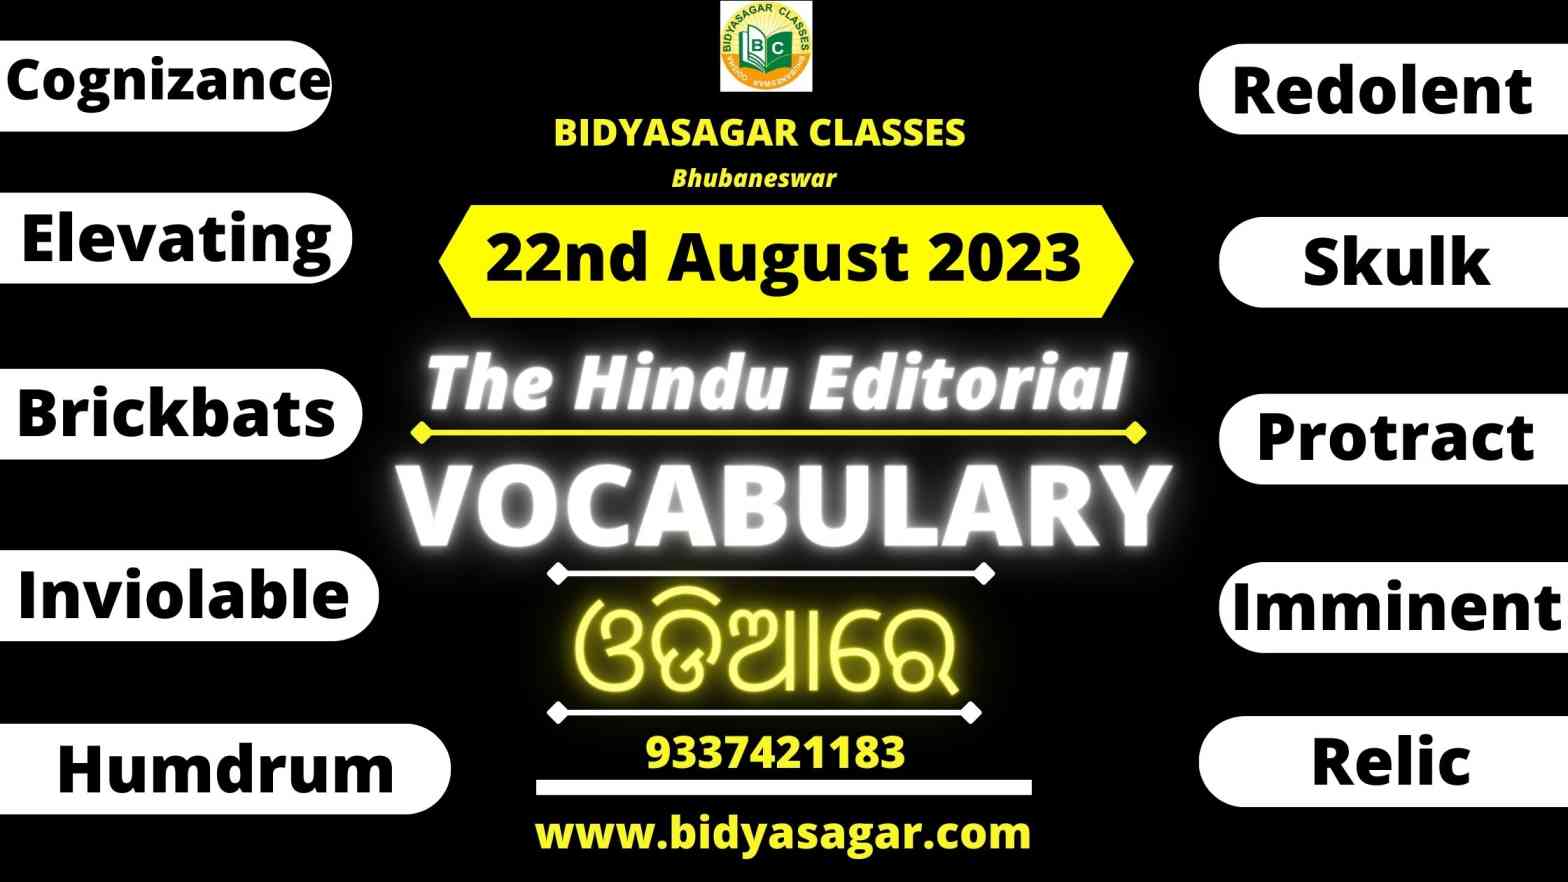 The Hindu Editorial Vocabulary of 22nd August 2023